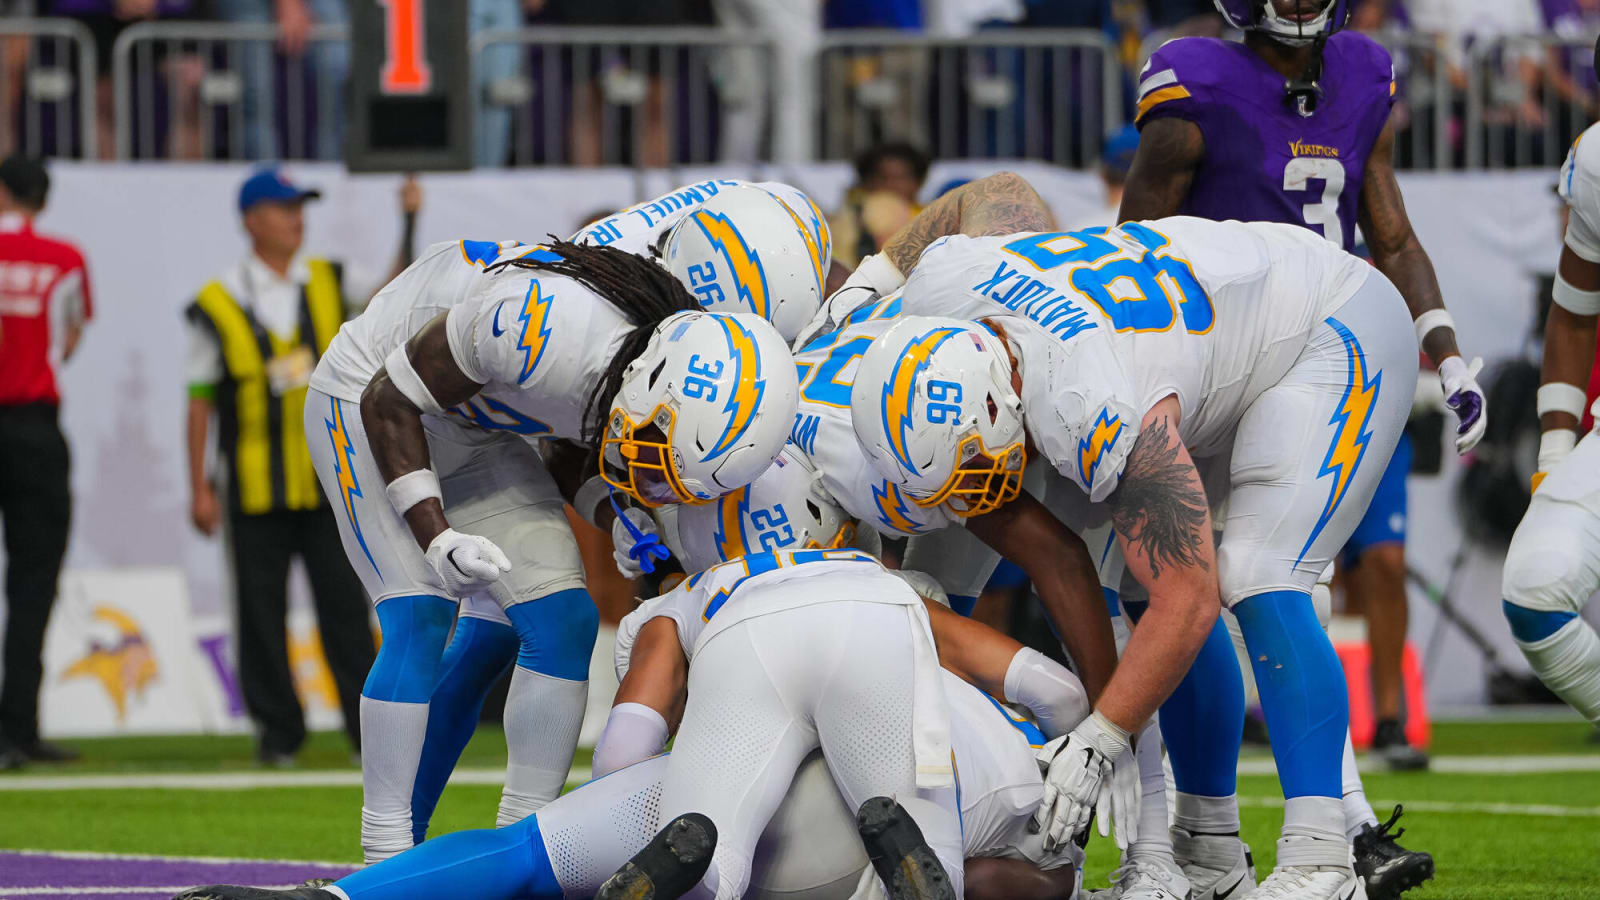 Los Angeles Chargers vs Chiefs: 5 Things The Chargers Must Do To Win In Week 7 